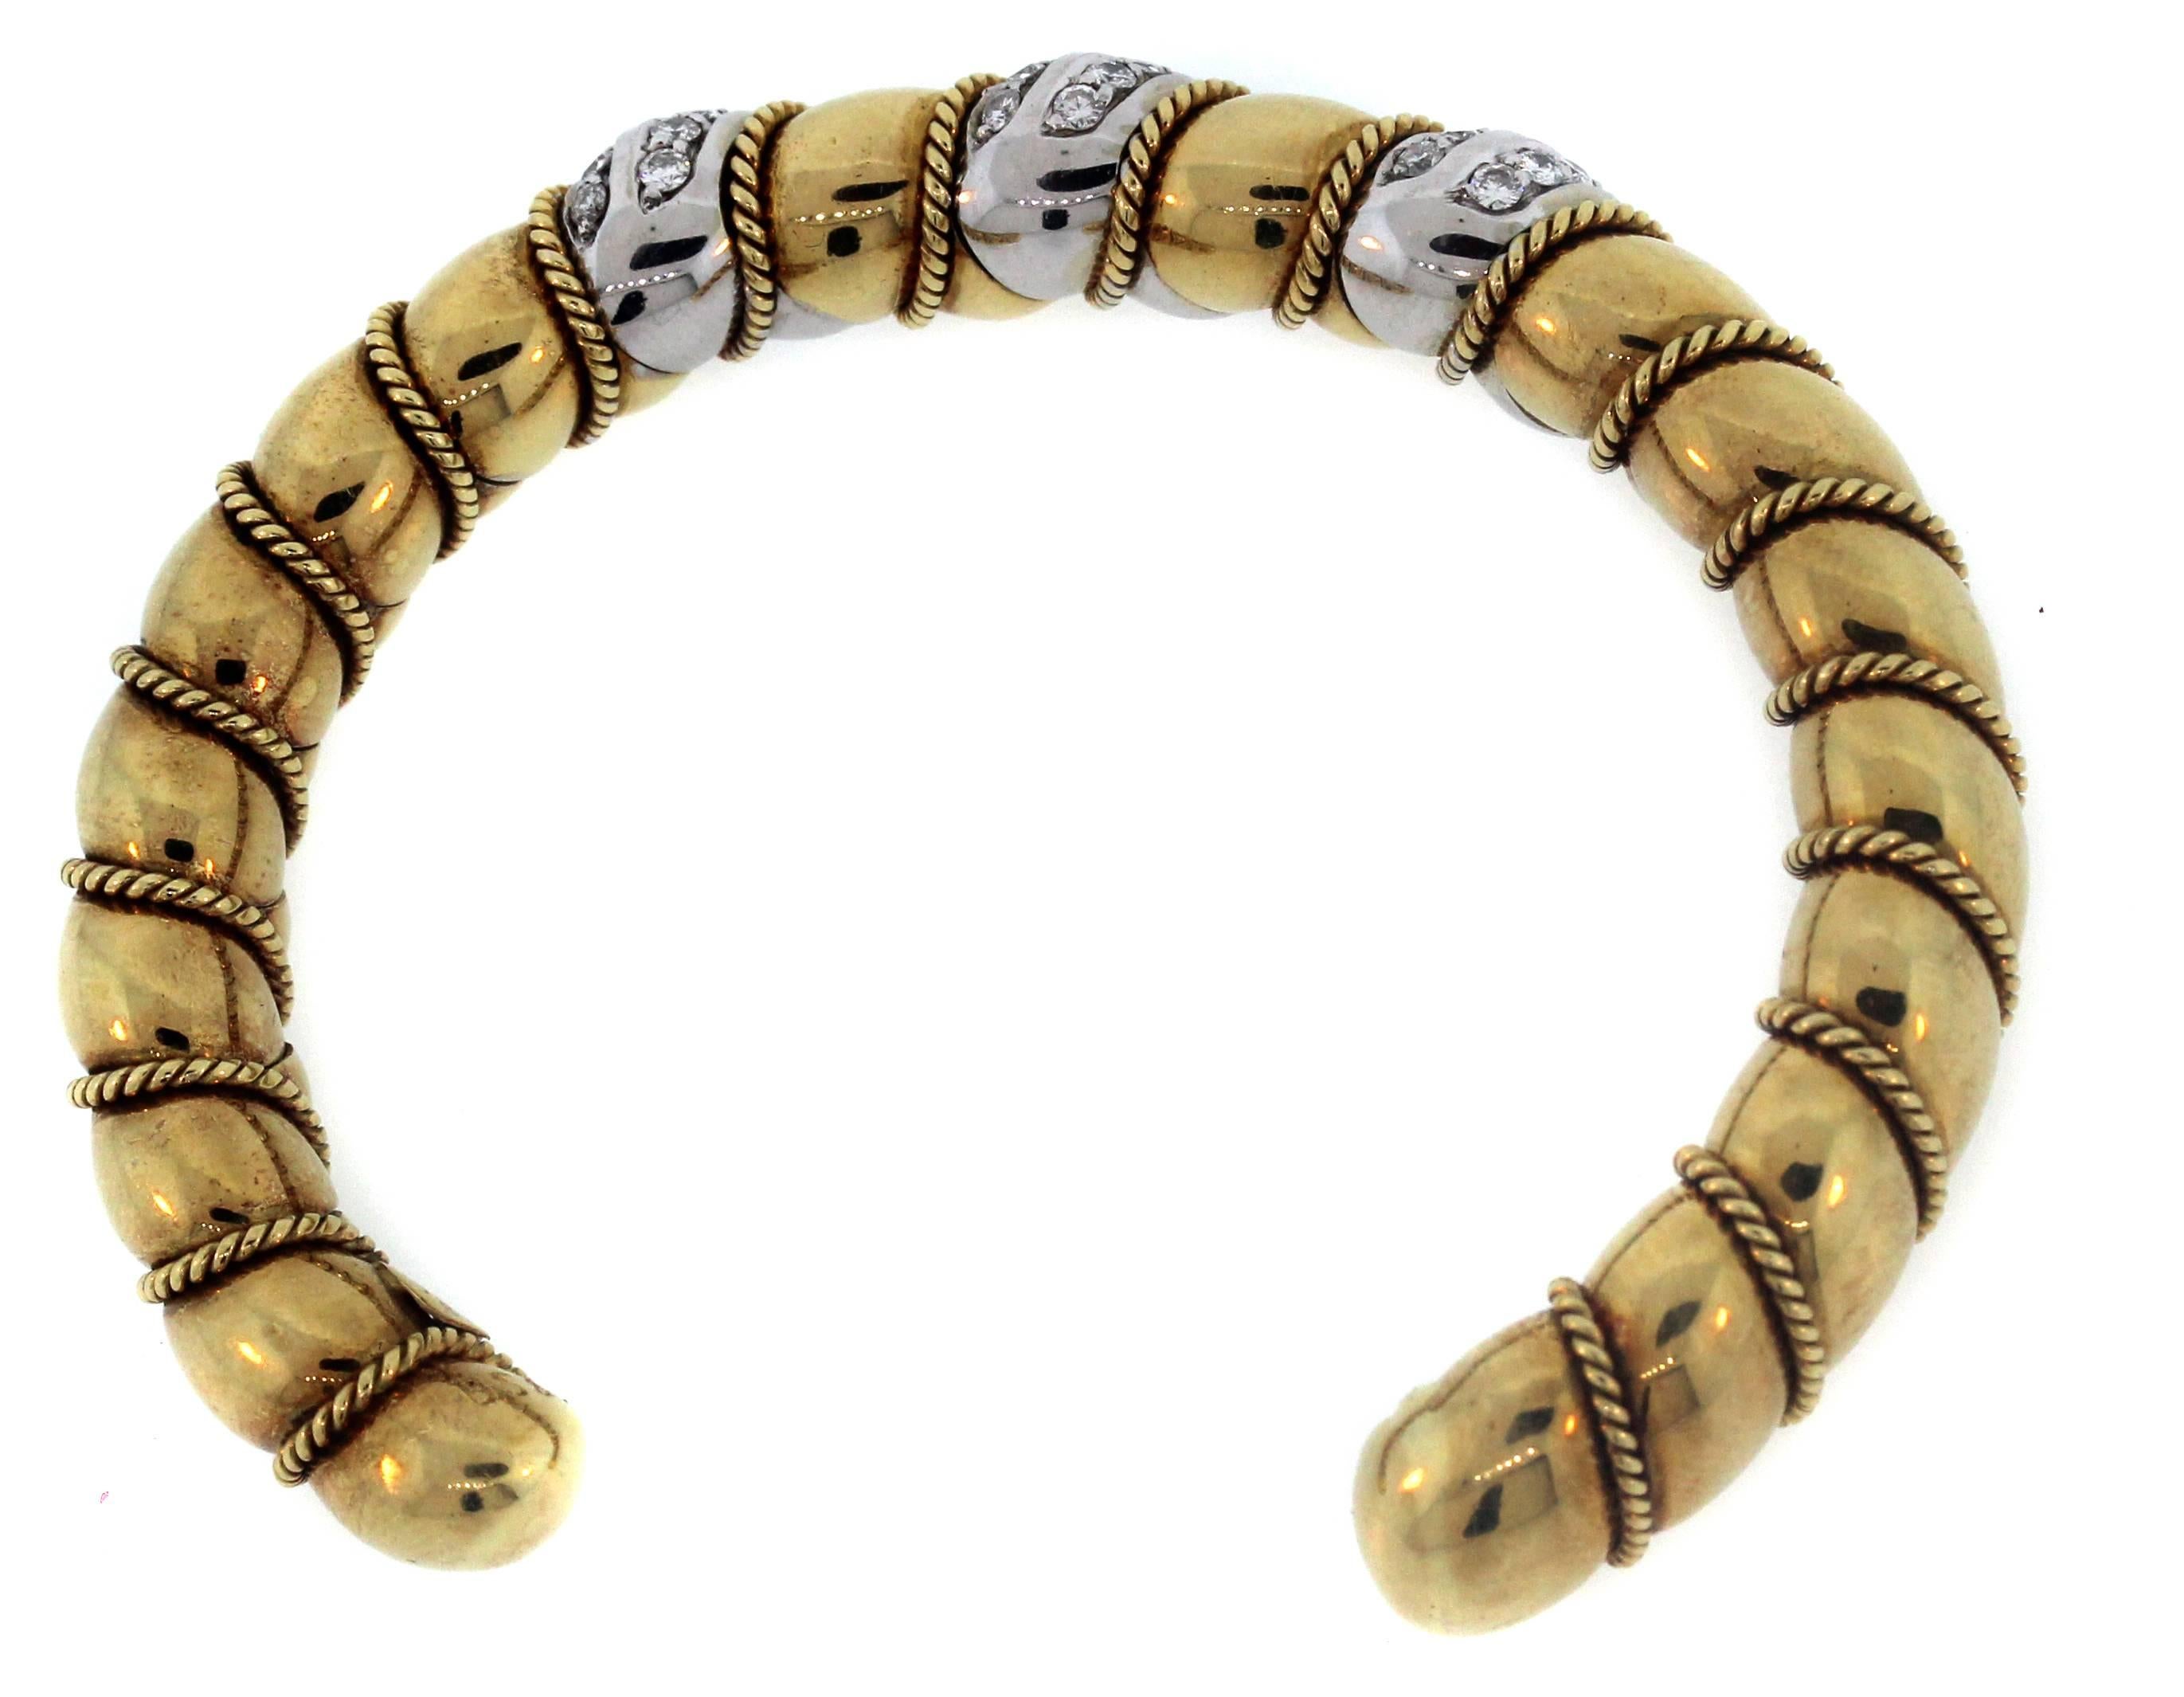 Sabbadini 18K Yellow White Two-Tone Gold Diamond Twisted Style Bangle Bracelet

Gorgeous craftsmanship and detail seen throughout the piece. 

1.05 carat Diamonds G Color, VS Clarity

Size 6. 

Bracelet is 0.35 inch width. Bracelet is slightly